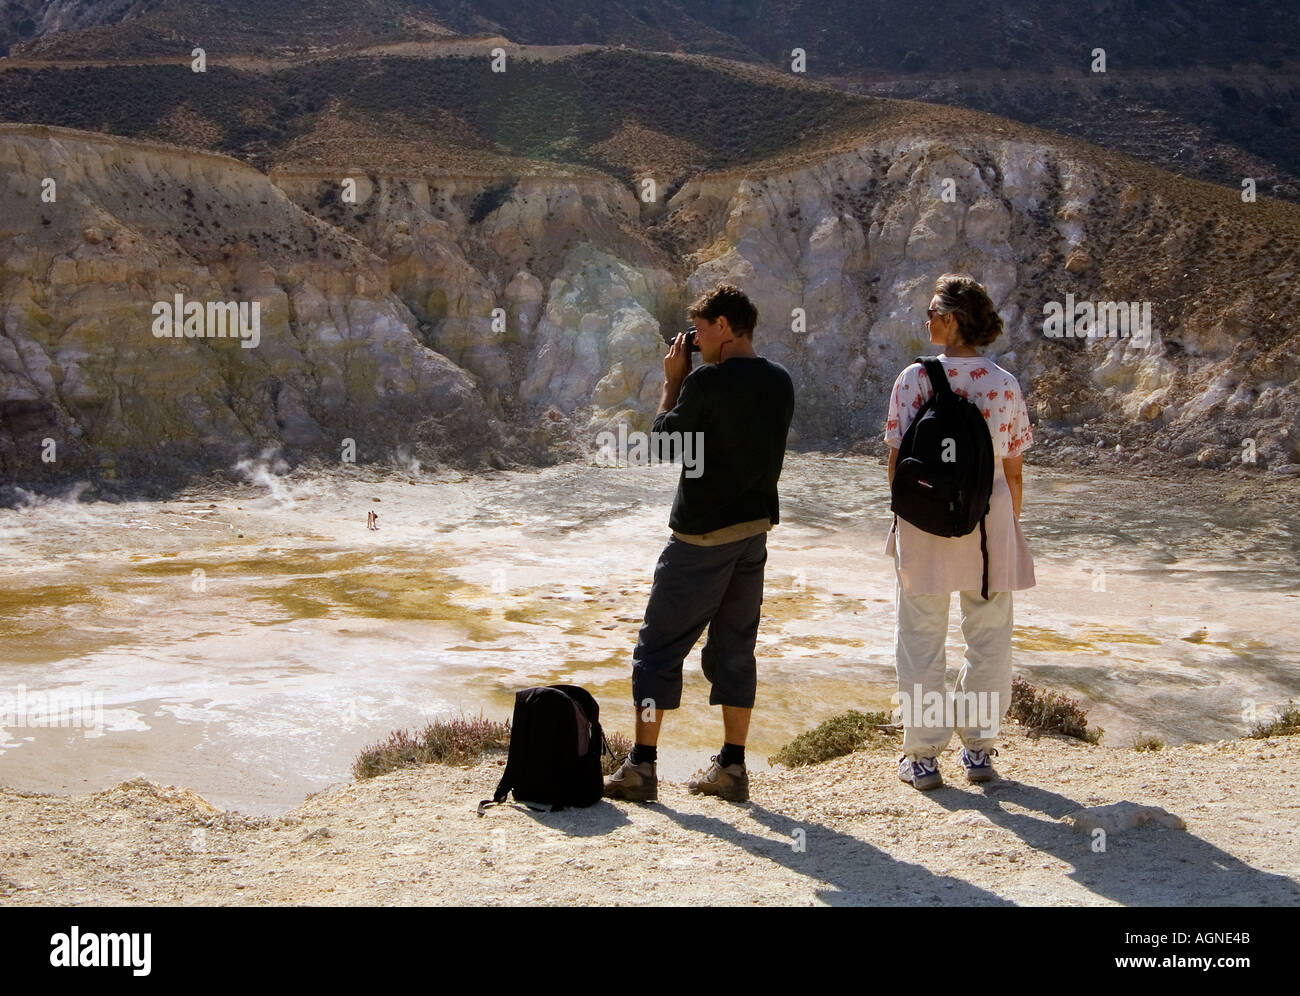 dh Stefanos volcano LAKKI PLATEAU GREECE NISYROS Adult Man woman couple tourists greek siteseeing island crater taking photograph with camera photos Stock Photo